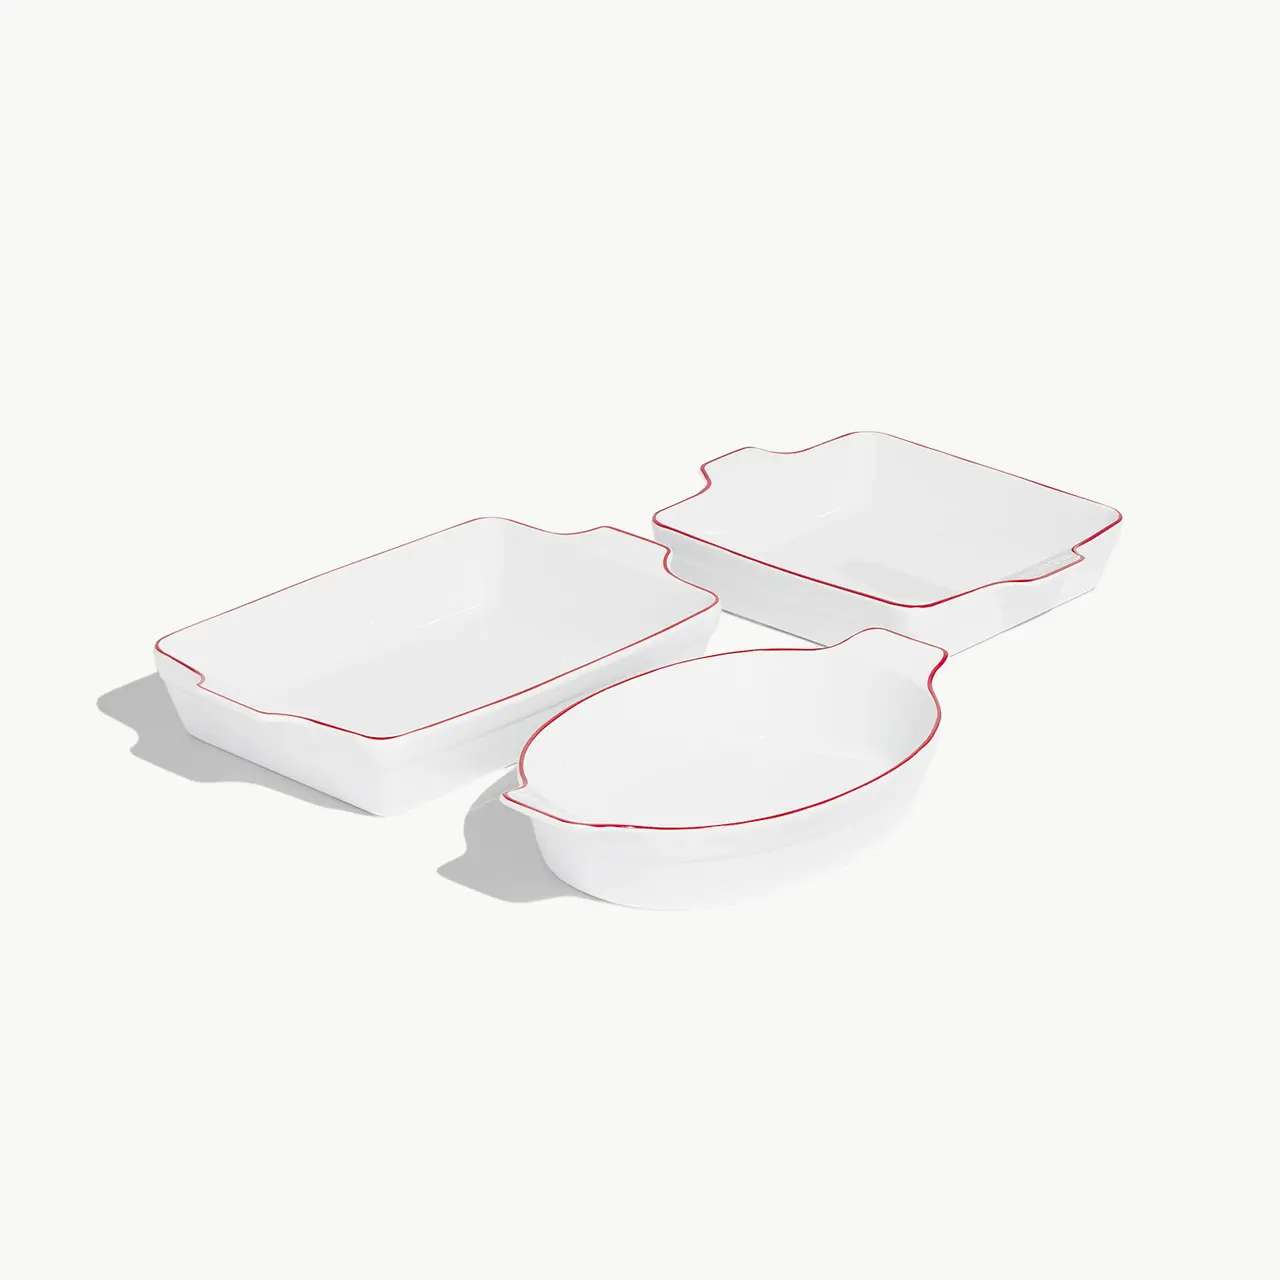 Three white serving dishes with red trim are presented on a light background.